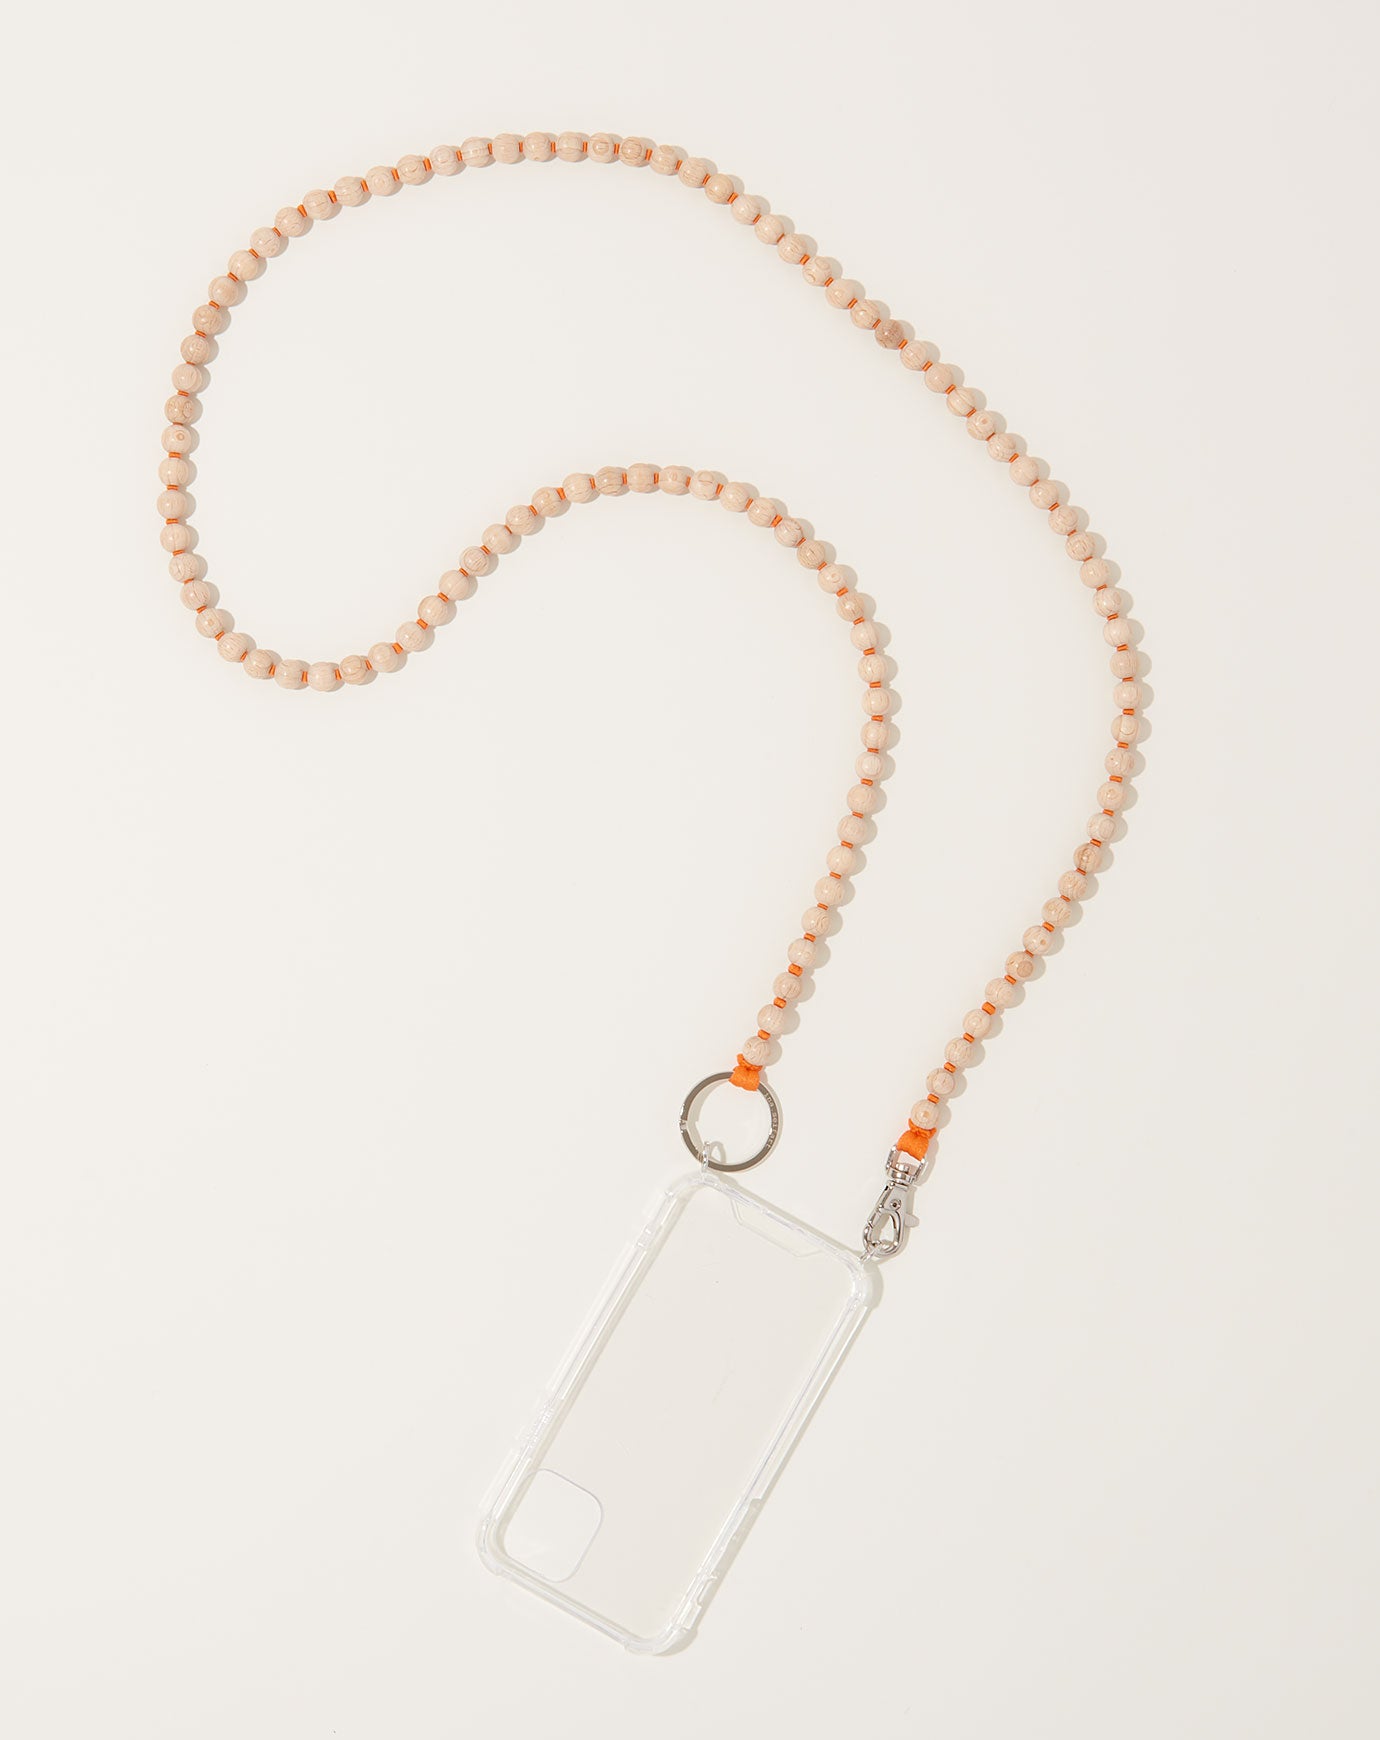 Ina Seifart Handykette iPhone Necklace in Natural on Orange